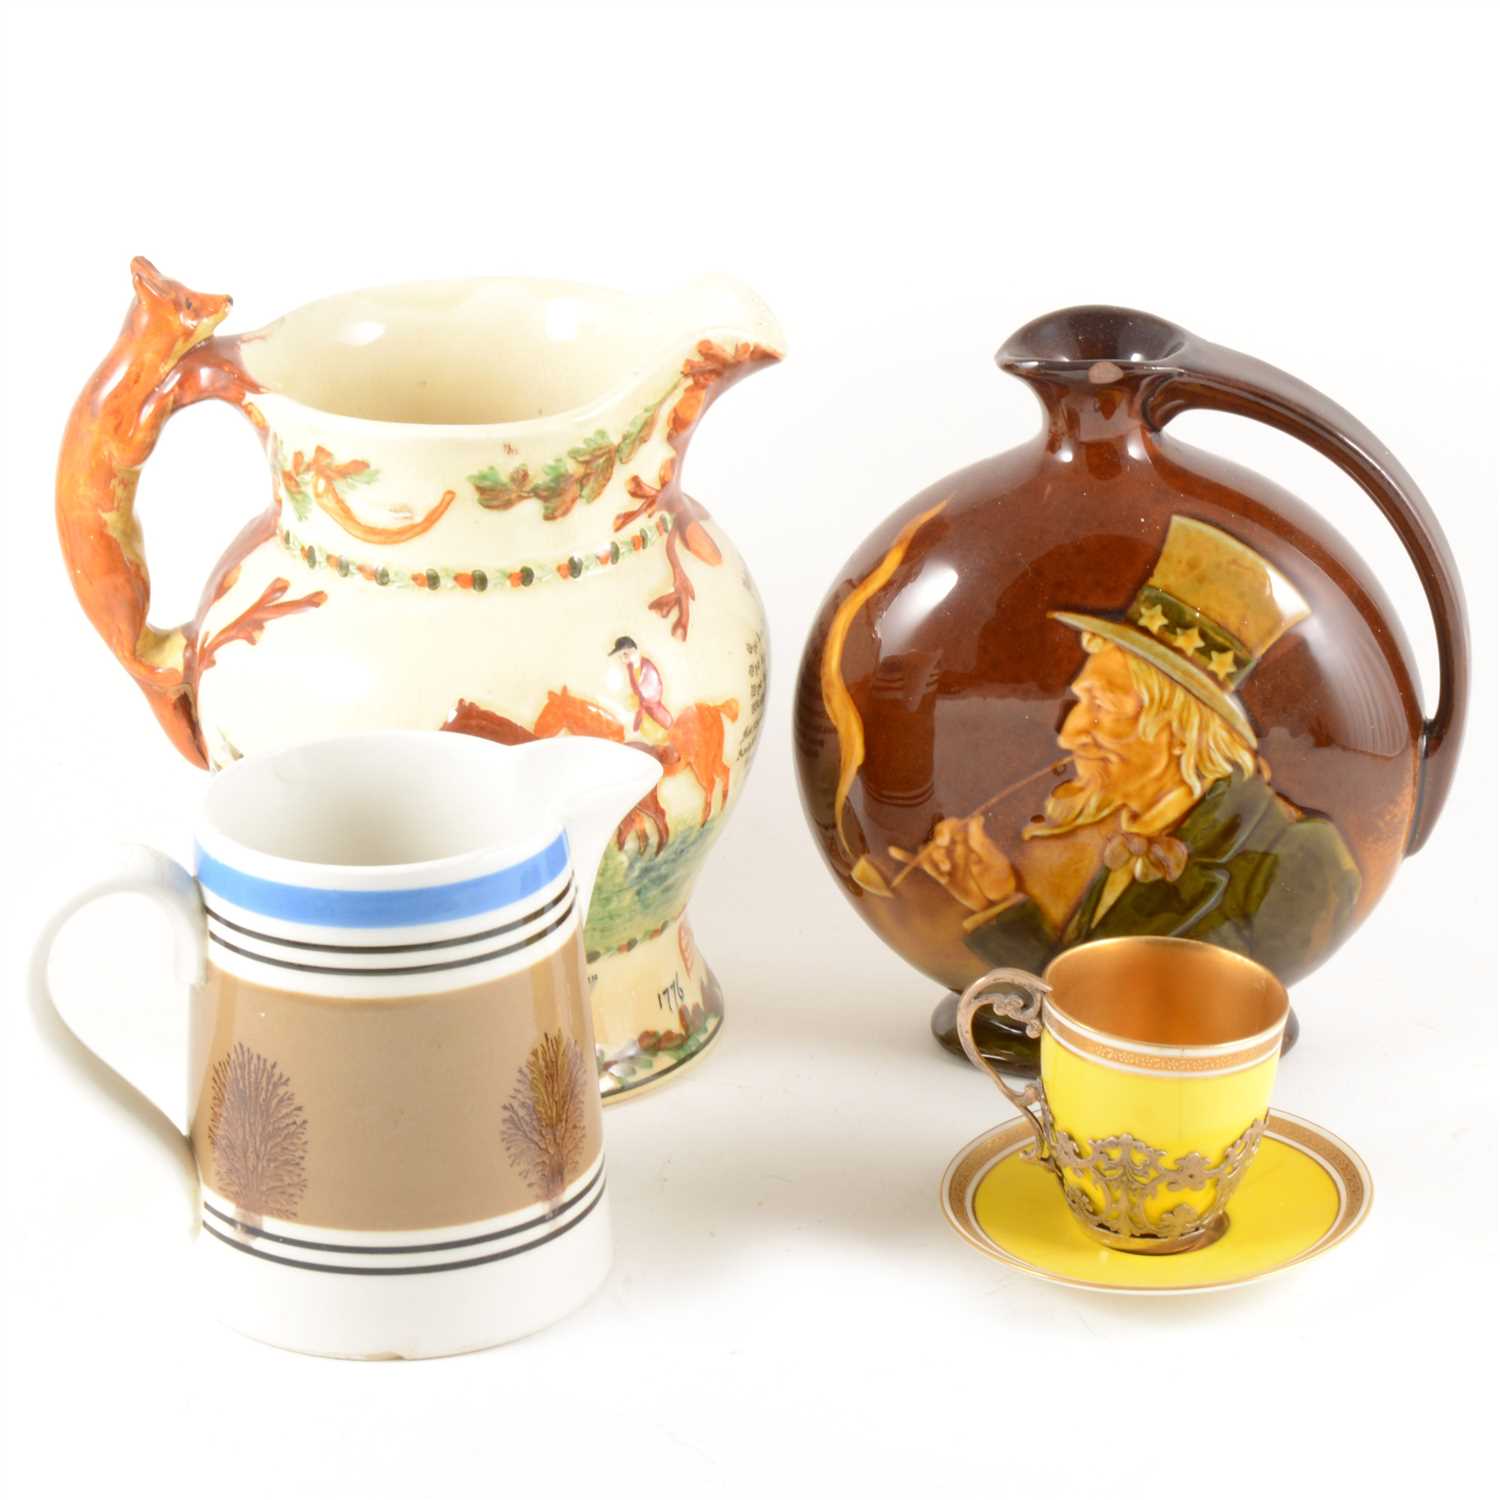 Lot 74 - A Mocha ware jug, John Peel jug, Dewar's whisky ewer by DOulton, and a Worcester coffee can and saucer.